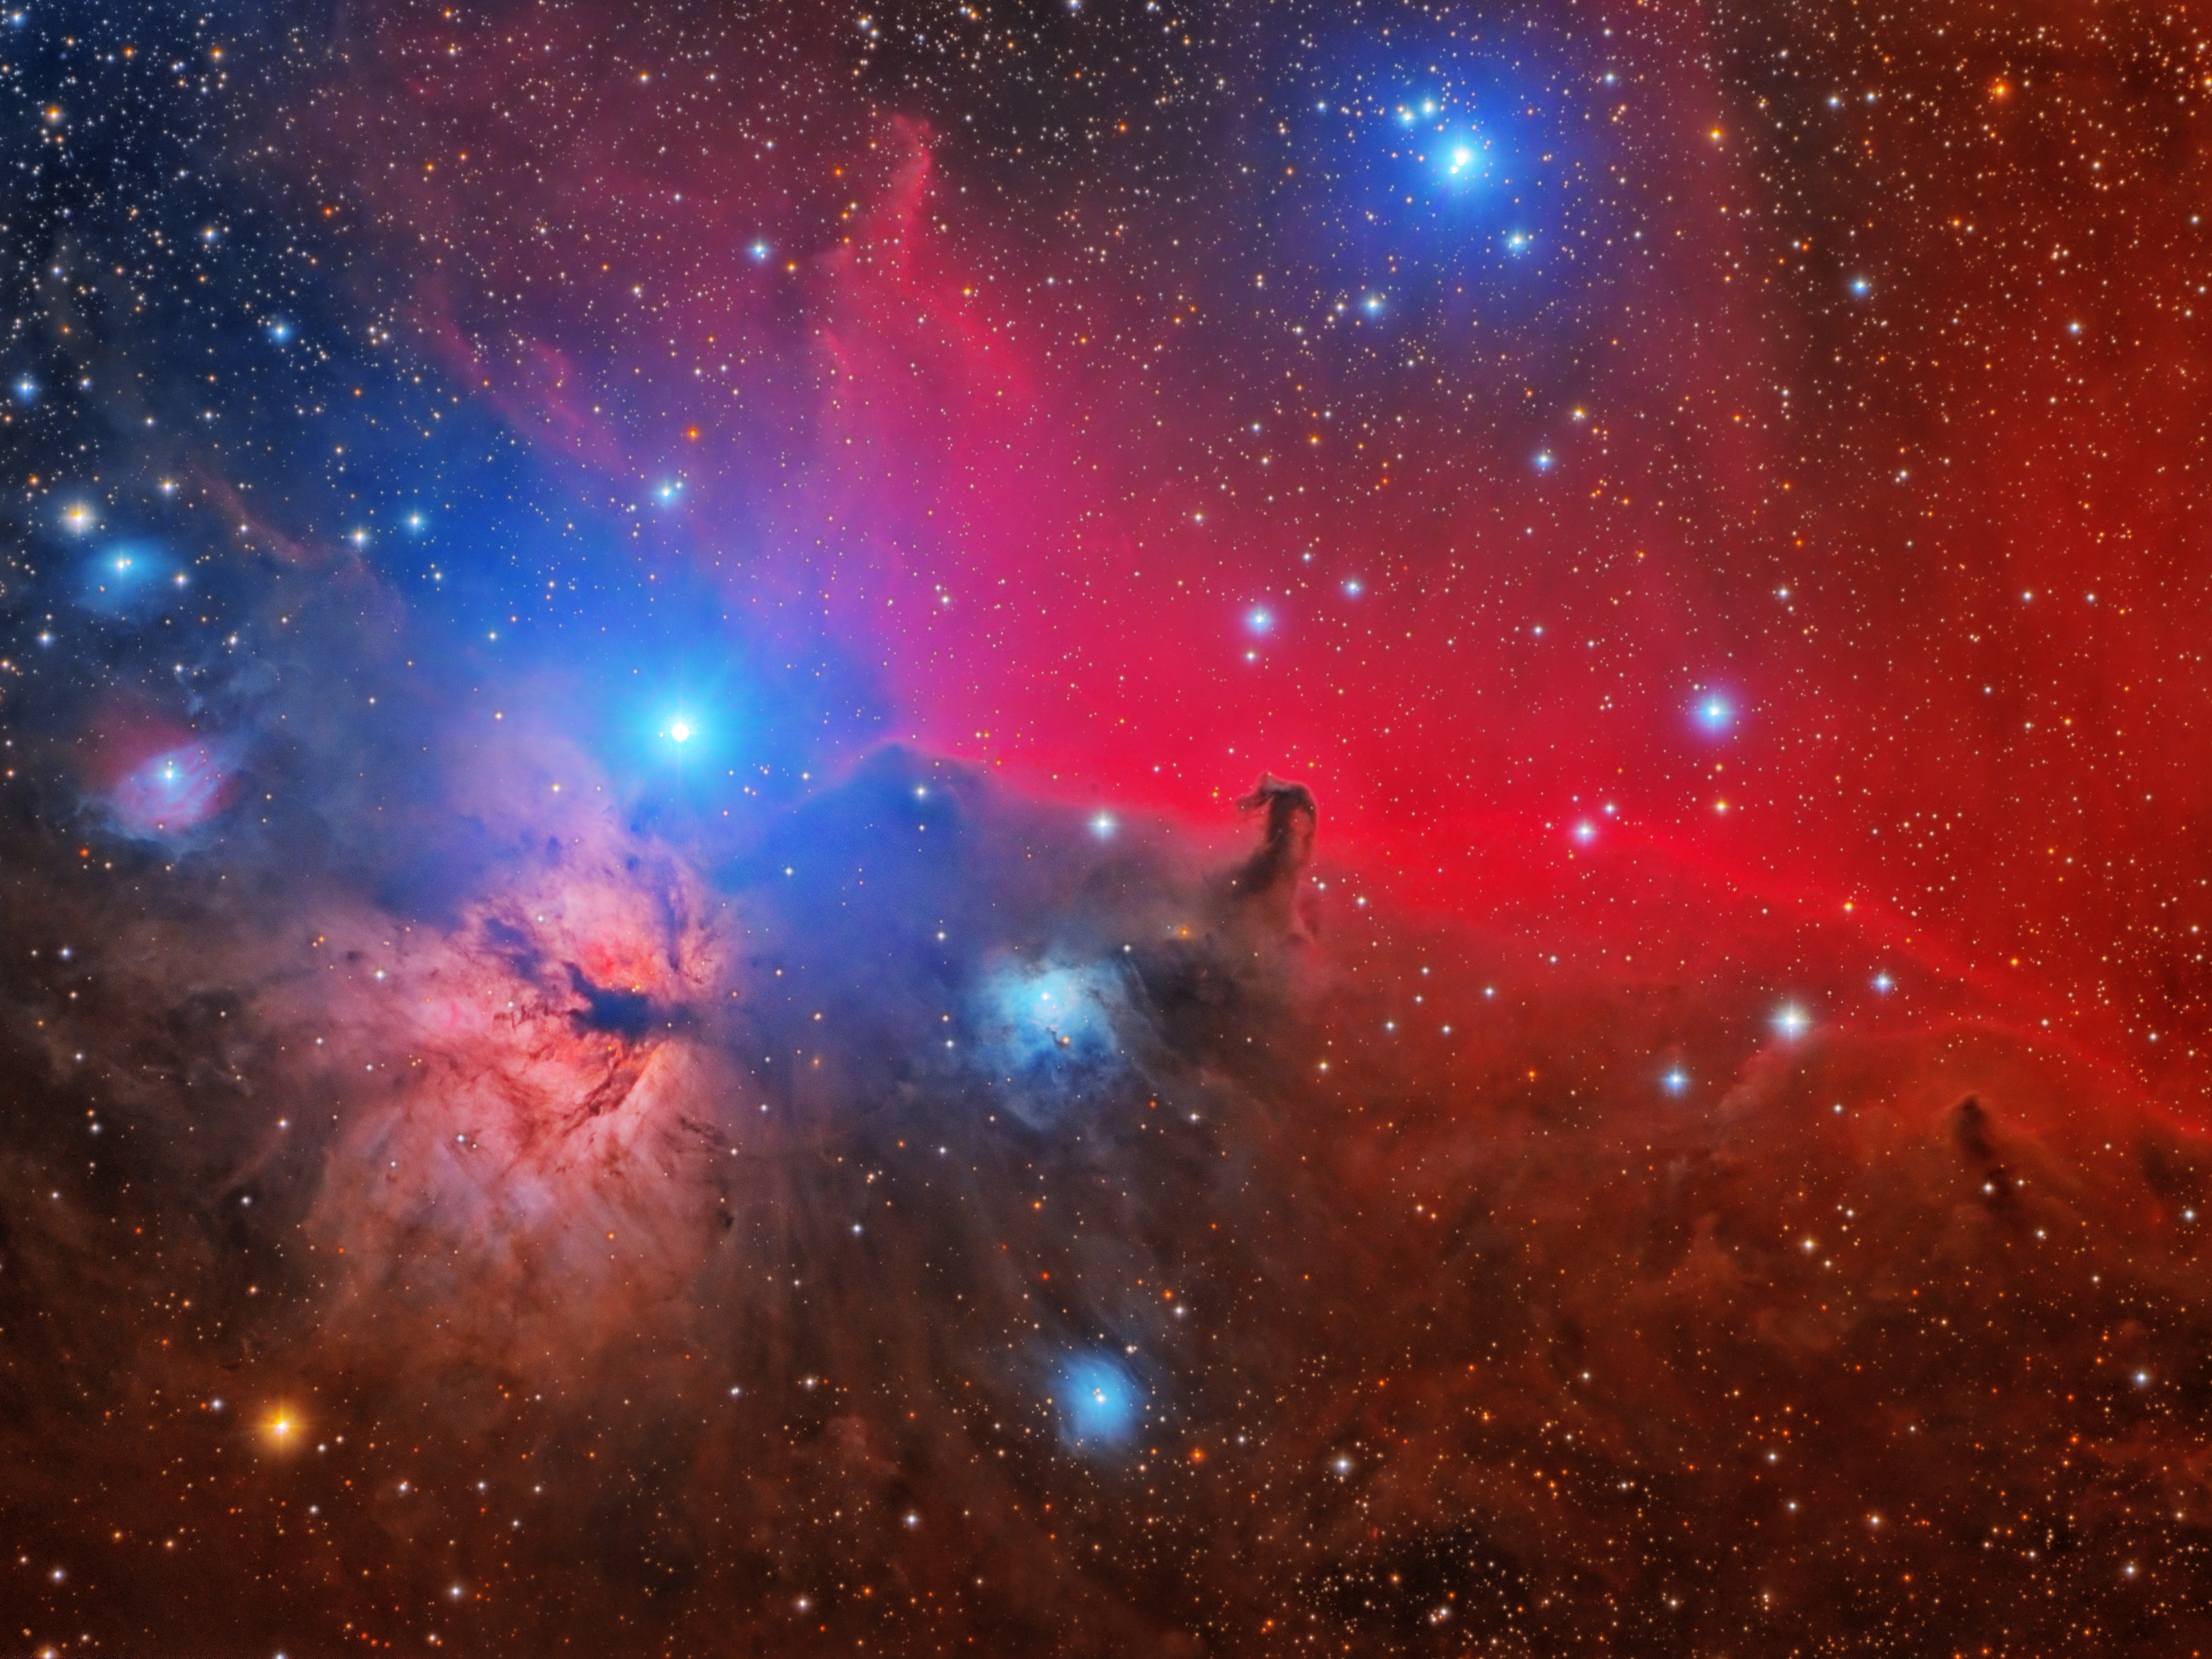 HD wallpaper, Astronomy, Outer Space, Horsehead Flame Nebula, Stars, Space Observation, Orion Constellation, Cosmology